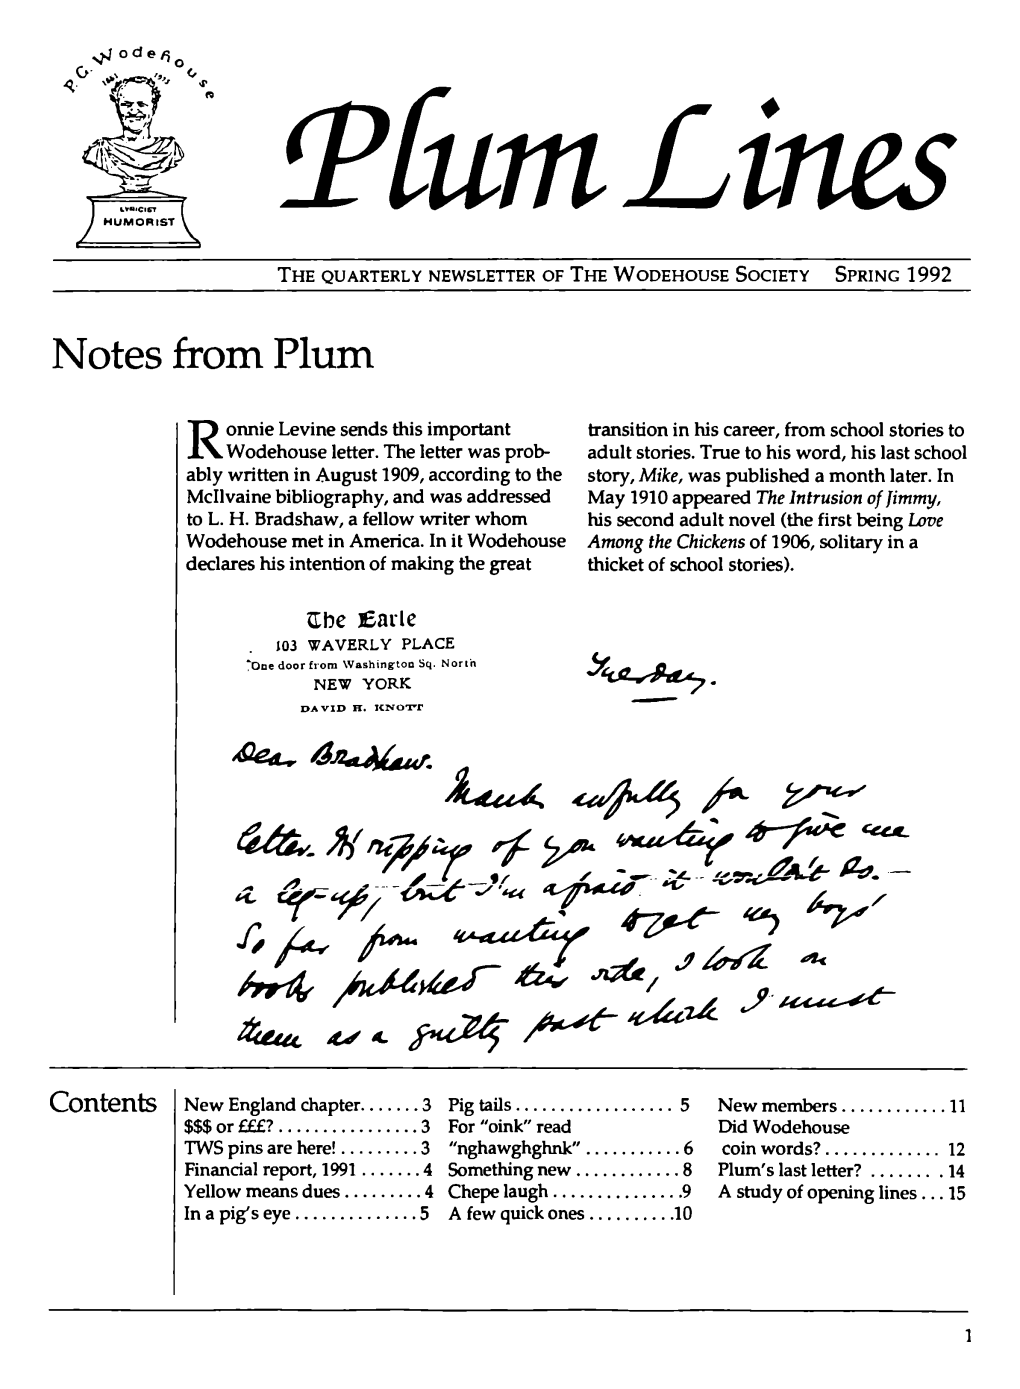 Notes from Plum